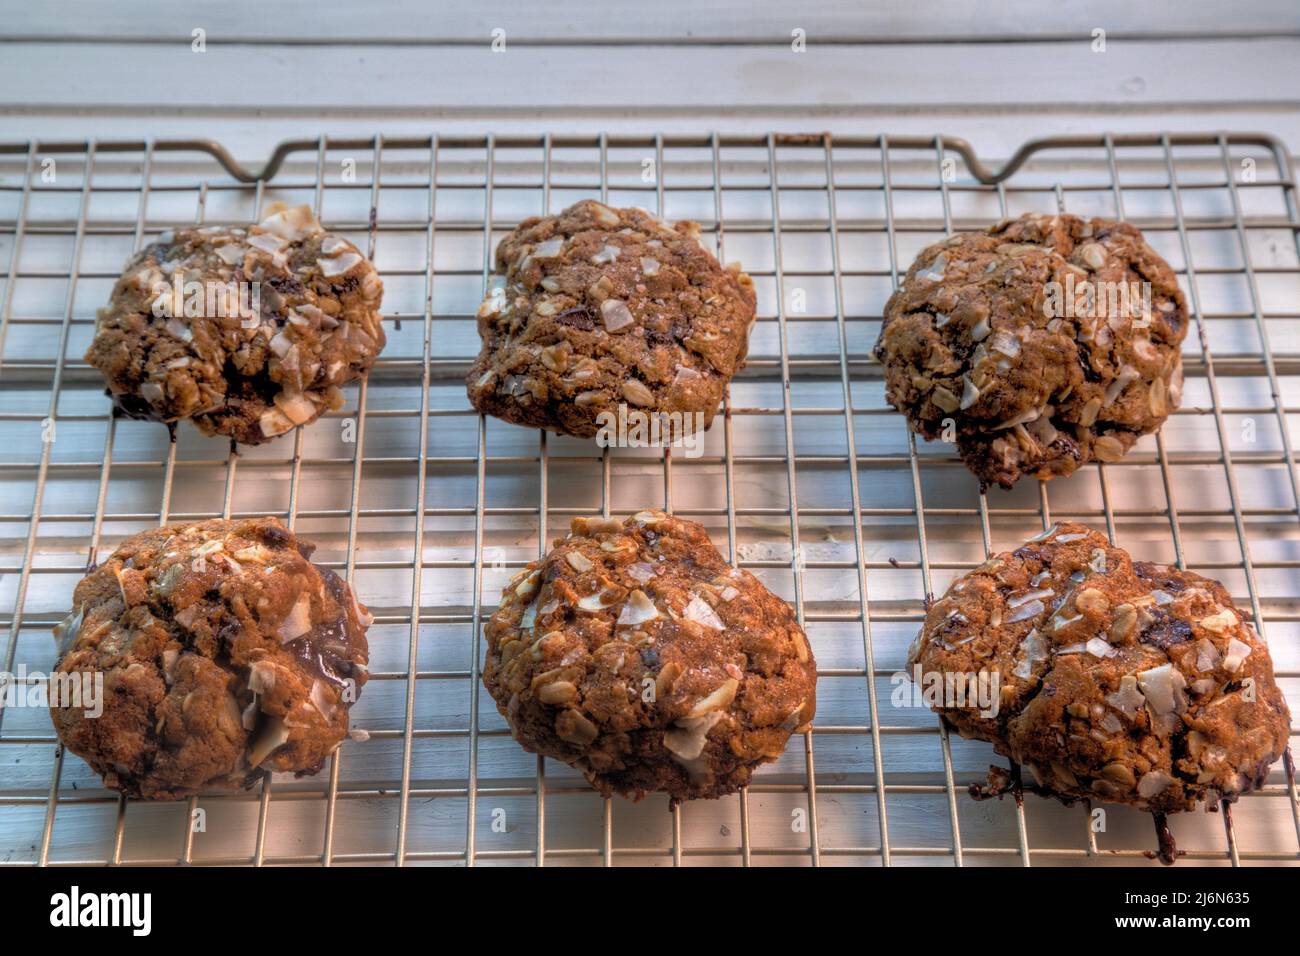 Side view of chocolate, coconut oatmeal cookies on wire coolong rack. Stock Photo